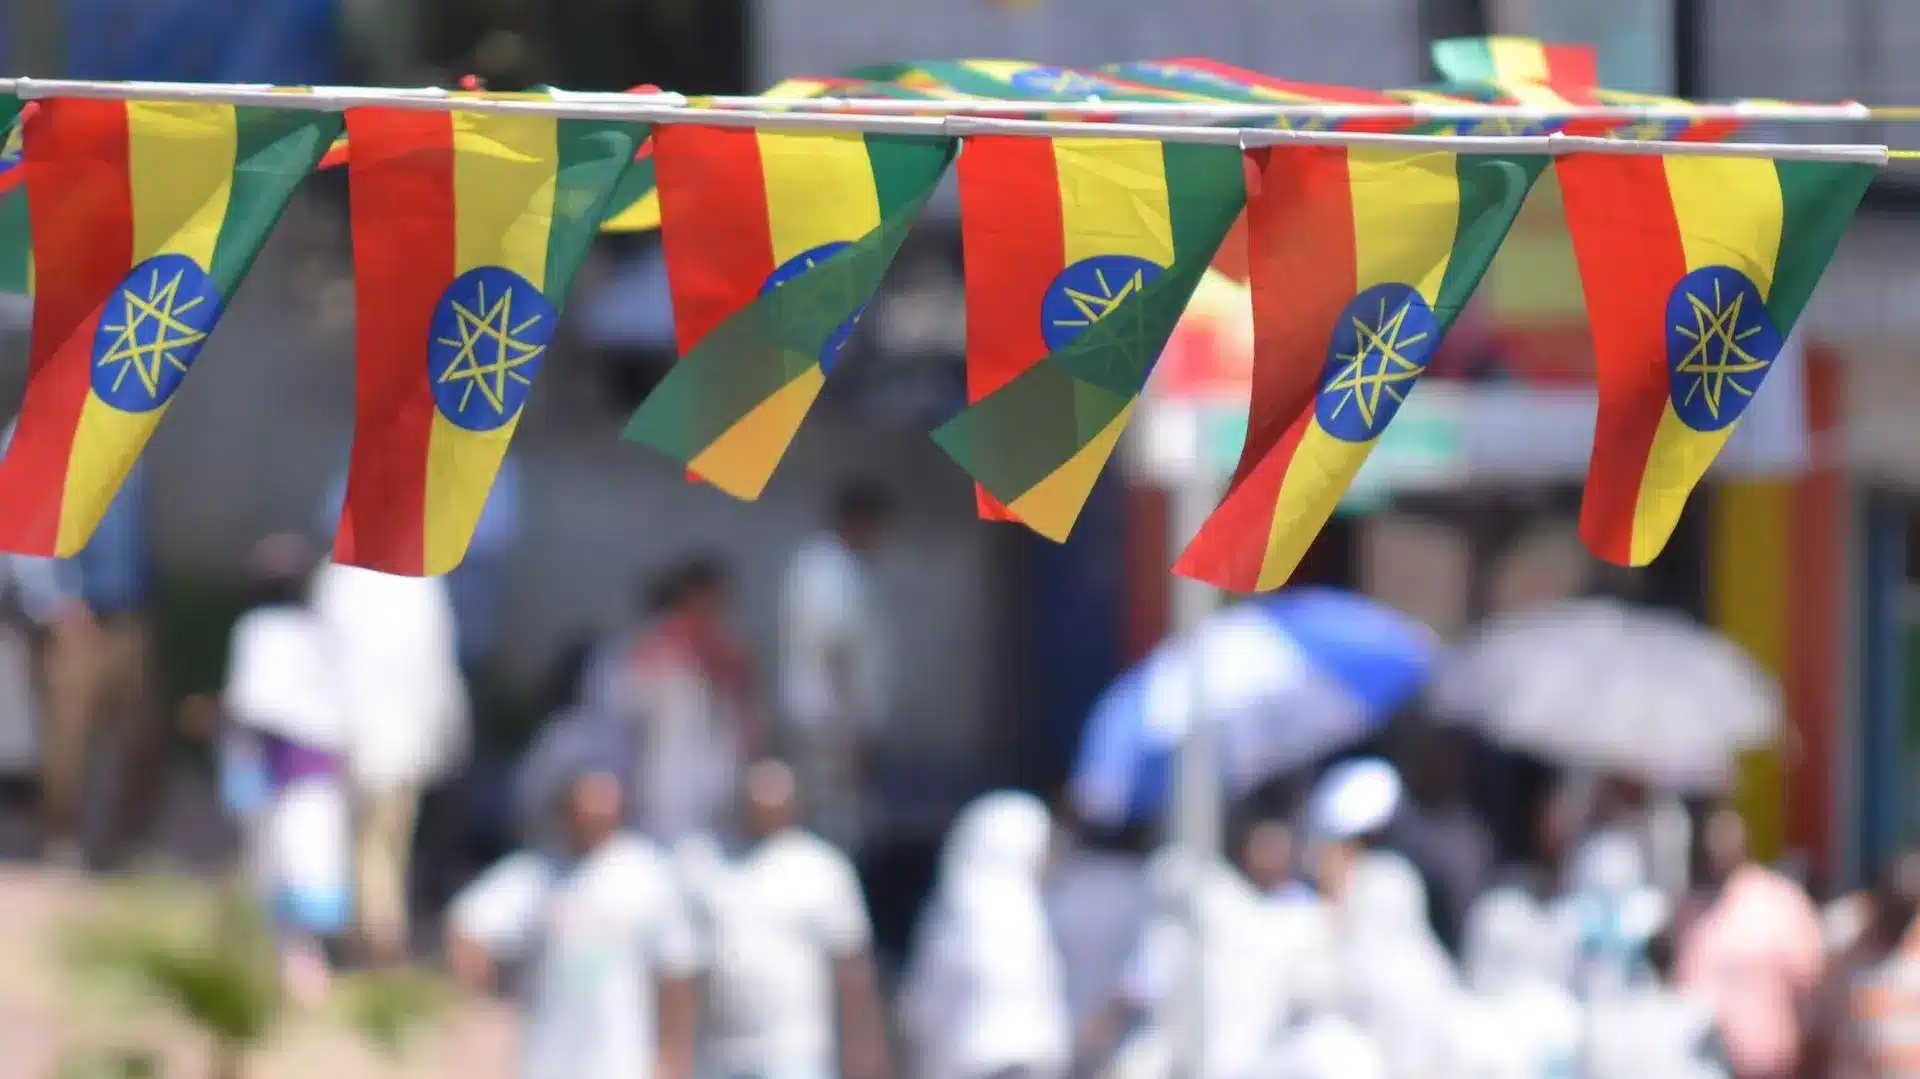 A chain of Ethiopian flags at an event. Photo: Flickr/Global Panorama.